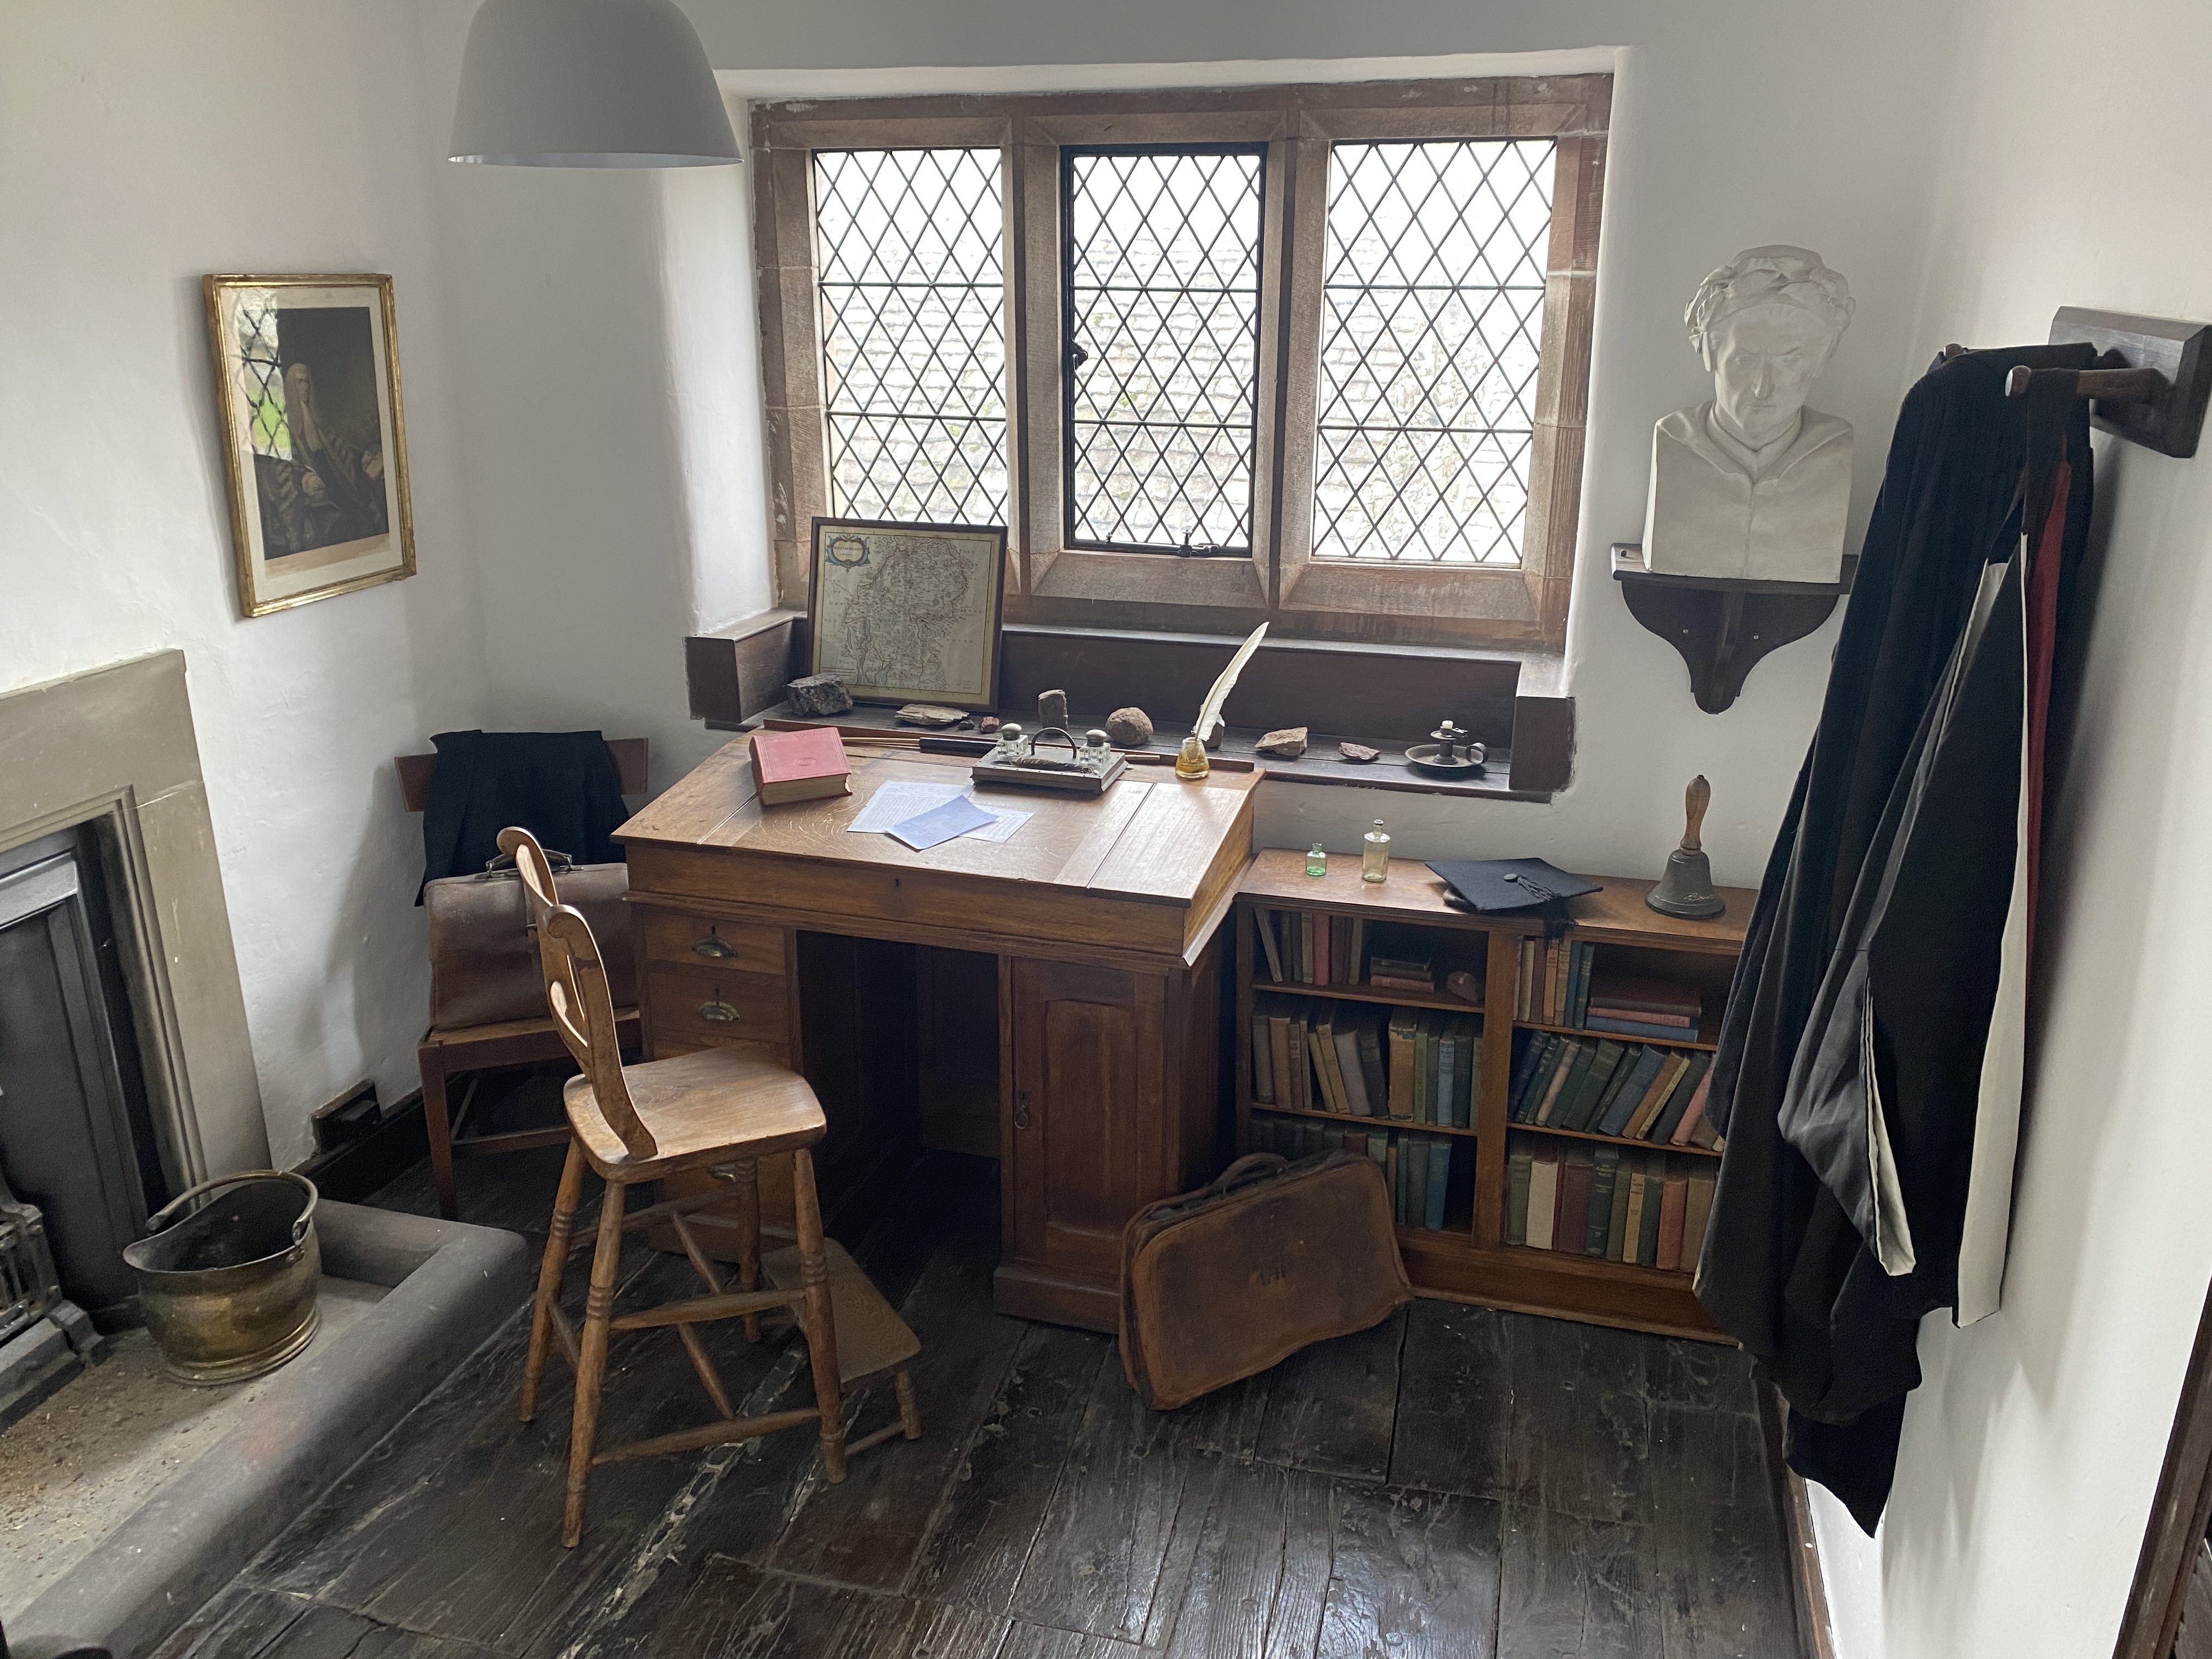 Photograph of Headmaster's study. There is a small bookcase filled with books. A desk covered in papers, books and a quill & ink. A framed picture on the left wall and a mounted bust of Dante on the right wall. The windowsill has a line of geological specimens on it. 